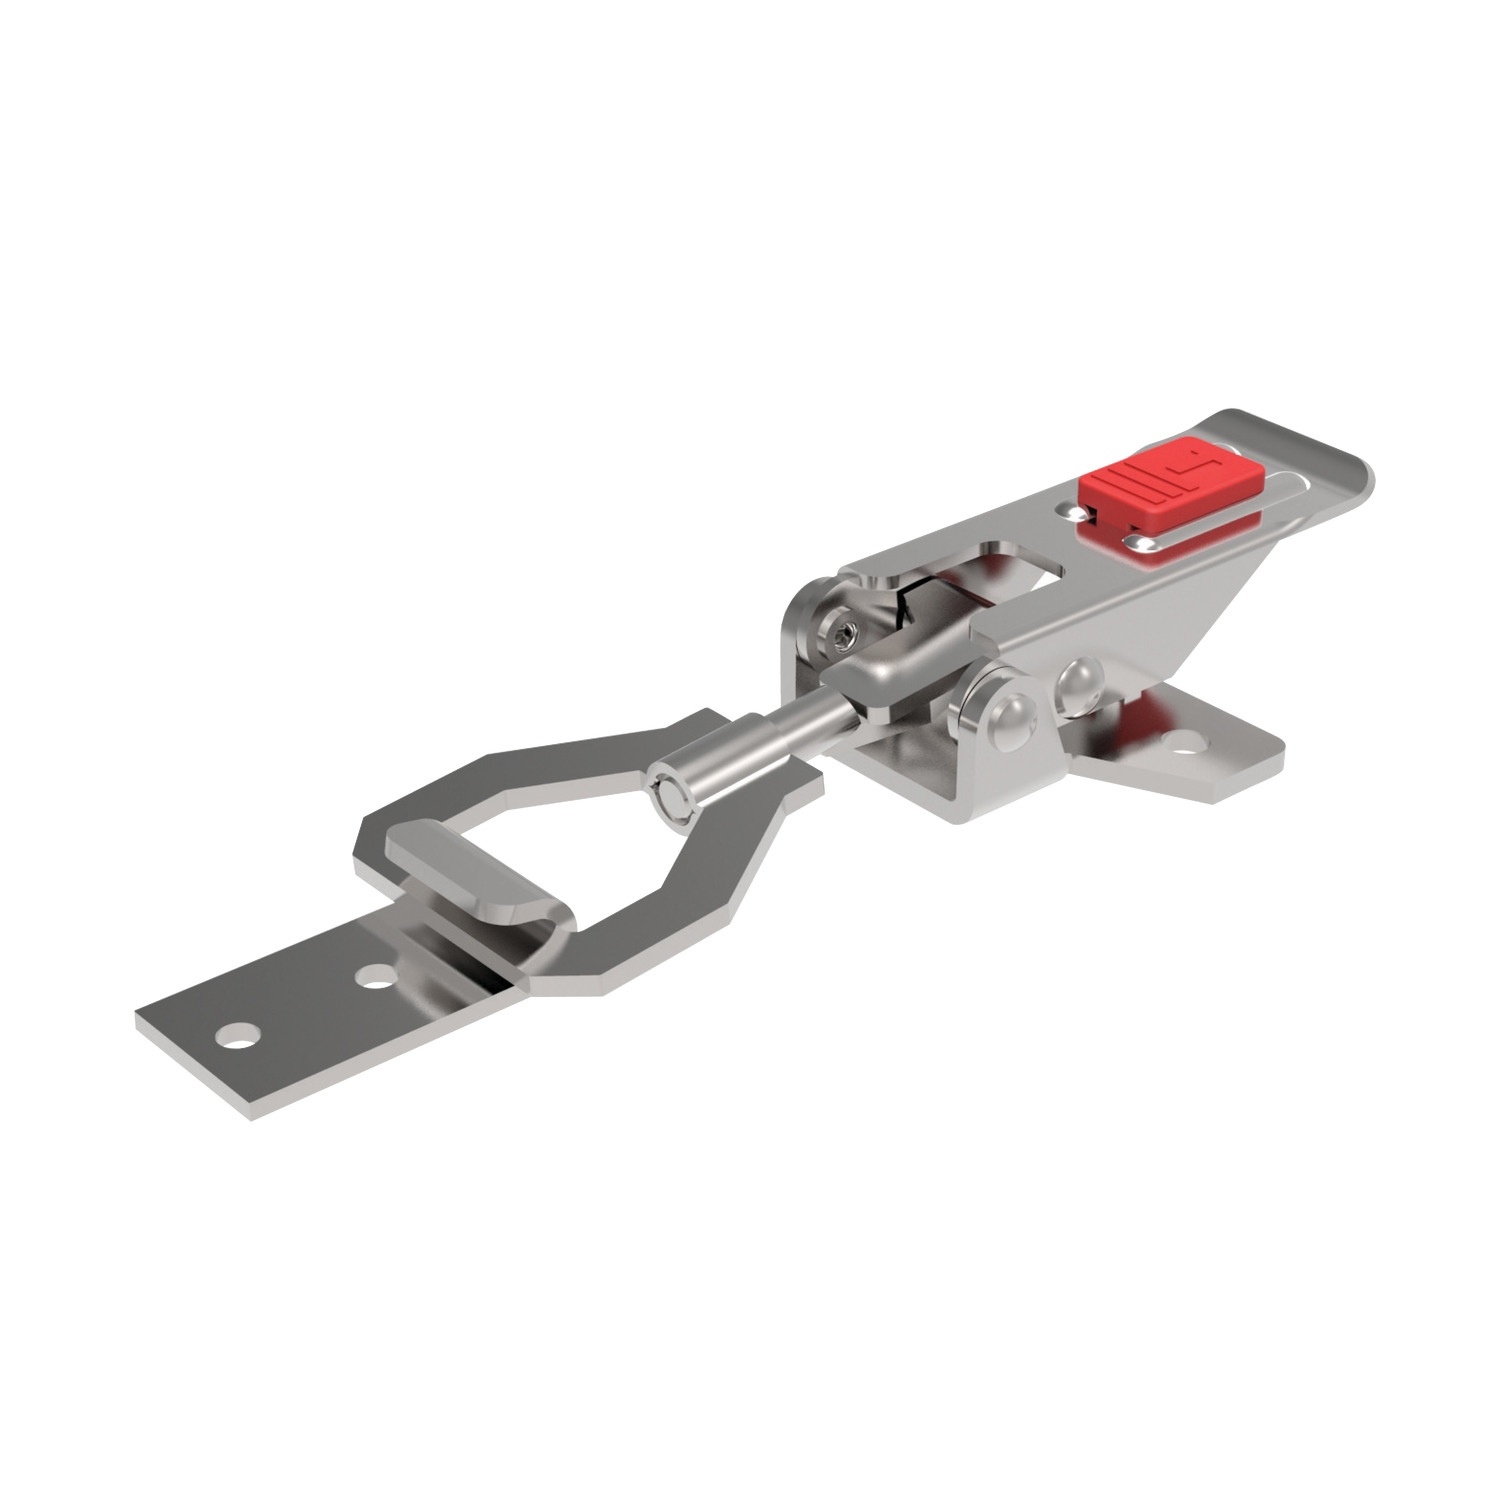 Toggle Latches Stroke adjustment of upto 12mm, this front strike mounting draw latch has a secondary lock for added security.